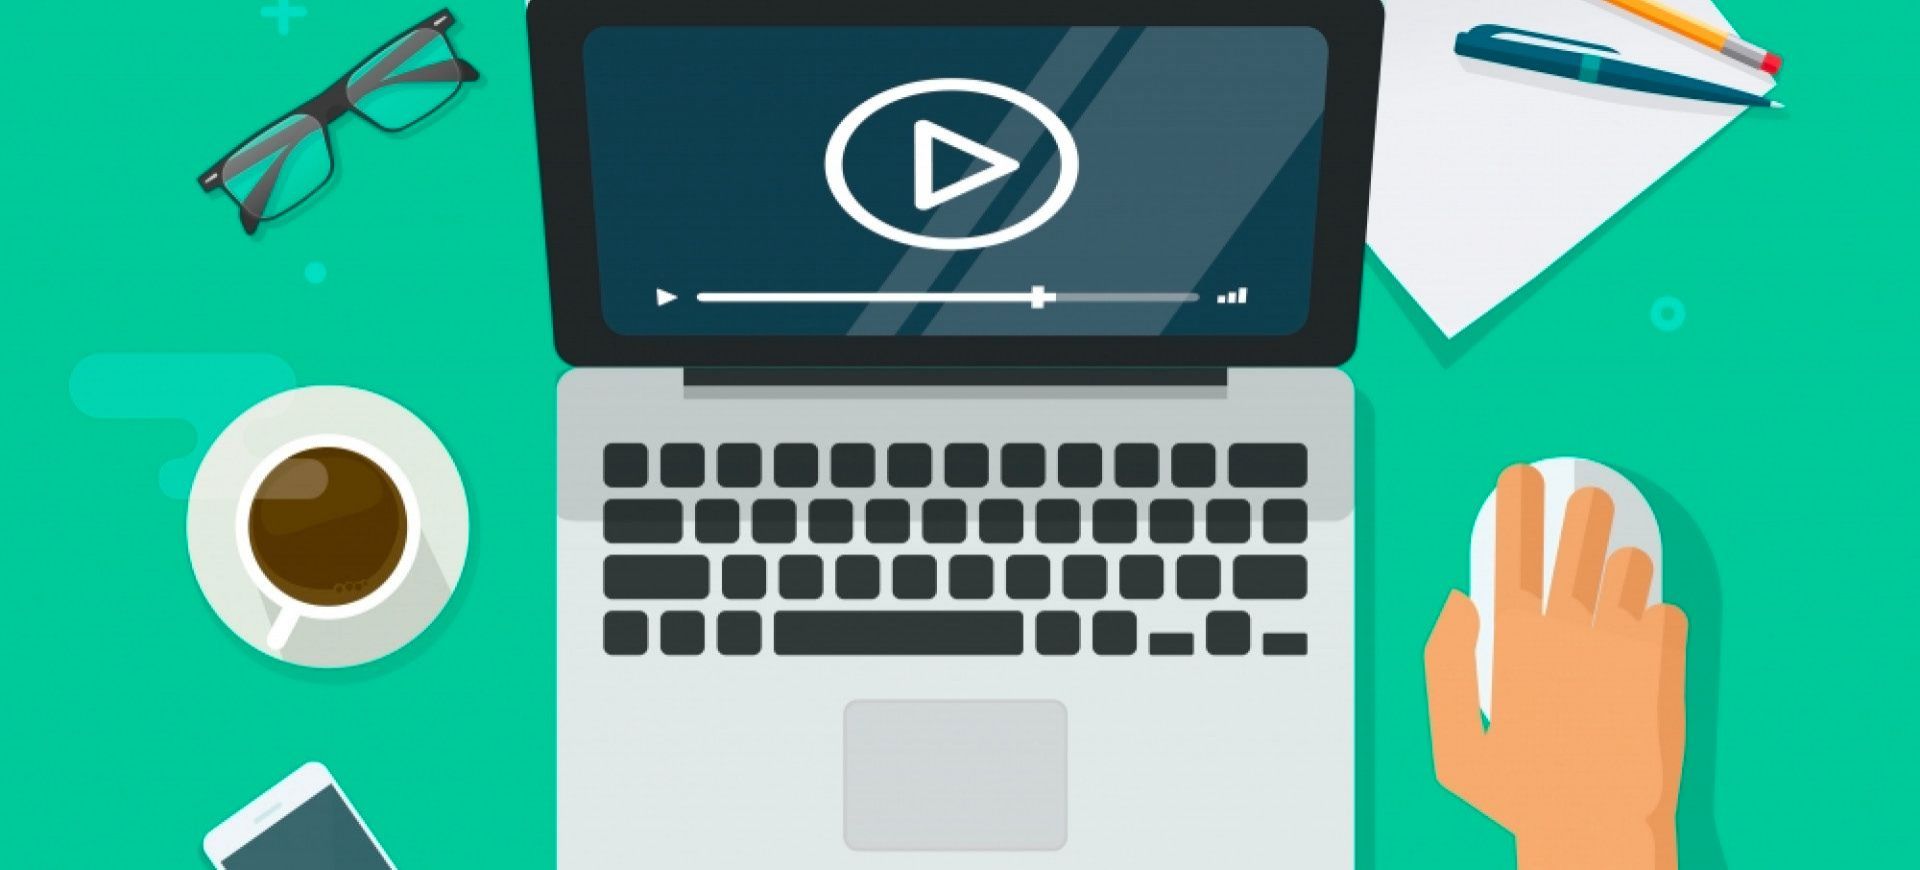 Why Video Is So Important In Marketing